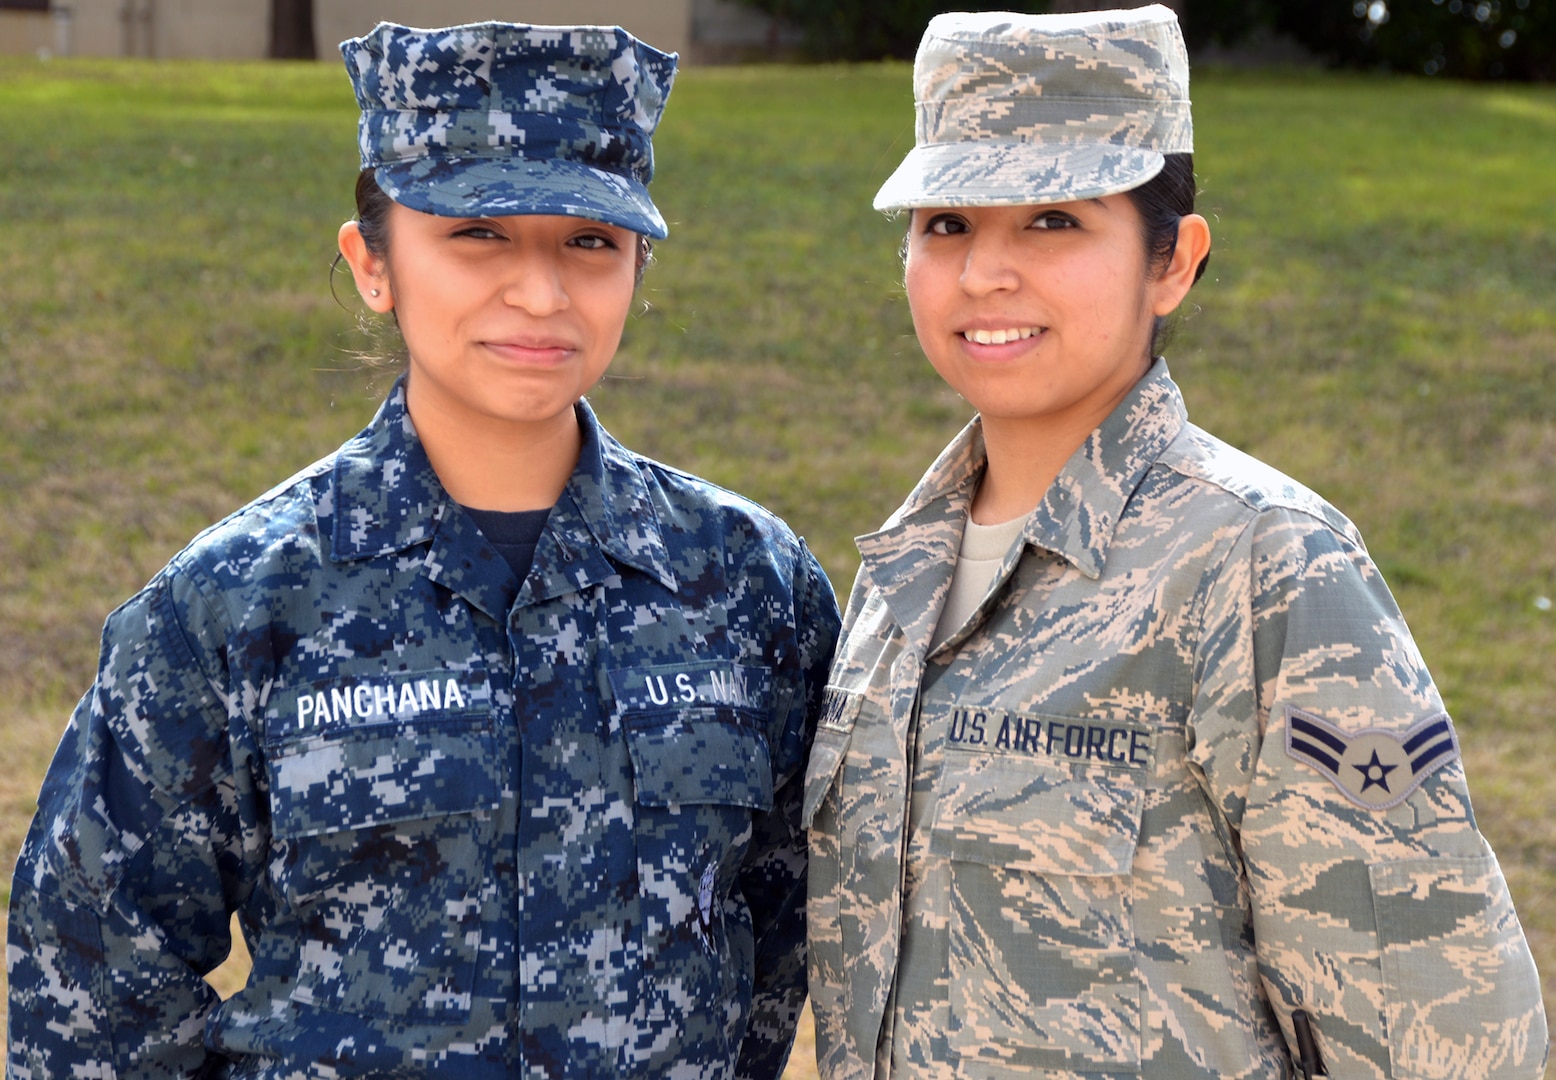 Sisters and service members, Navy Seaman Michelle Panchana (left) and Air Force Airman 1st Class Gisella Panchana (right) were students together at the Medical Education and Training Campus at Joint Base San Antonio-Fort Sam Houston from August 2017 to January 2018. Airman Panchana graduated from the METC Radiology Program Jan. 30, while Seaman Panchana is scheduled to complete the METC Pharmacy Program in April.